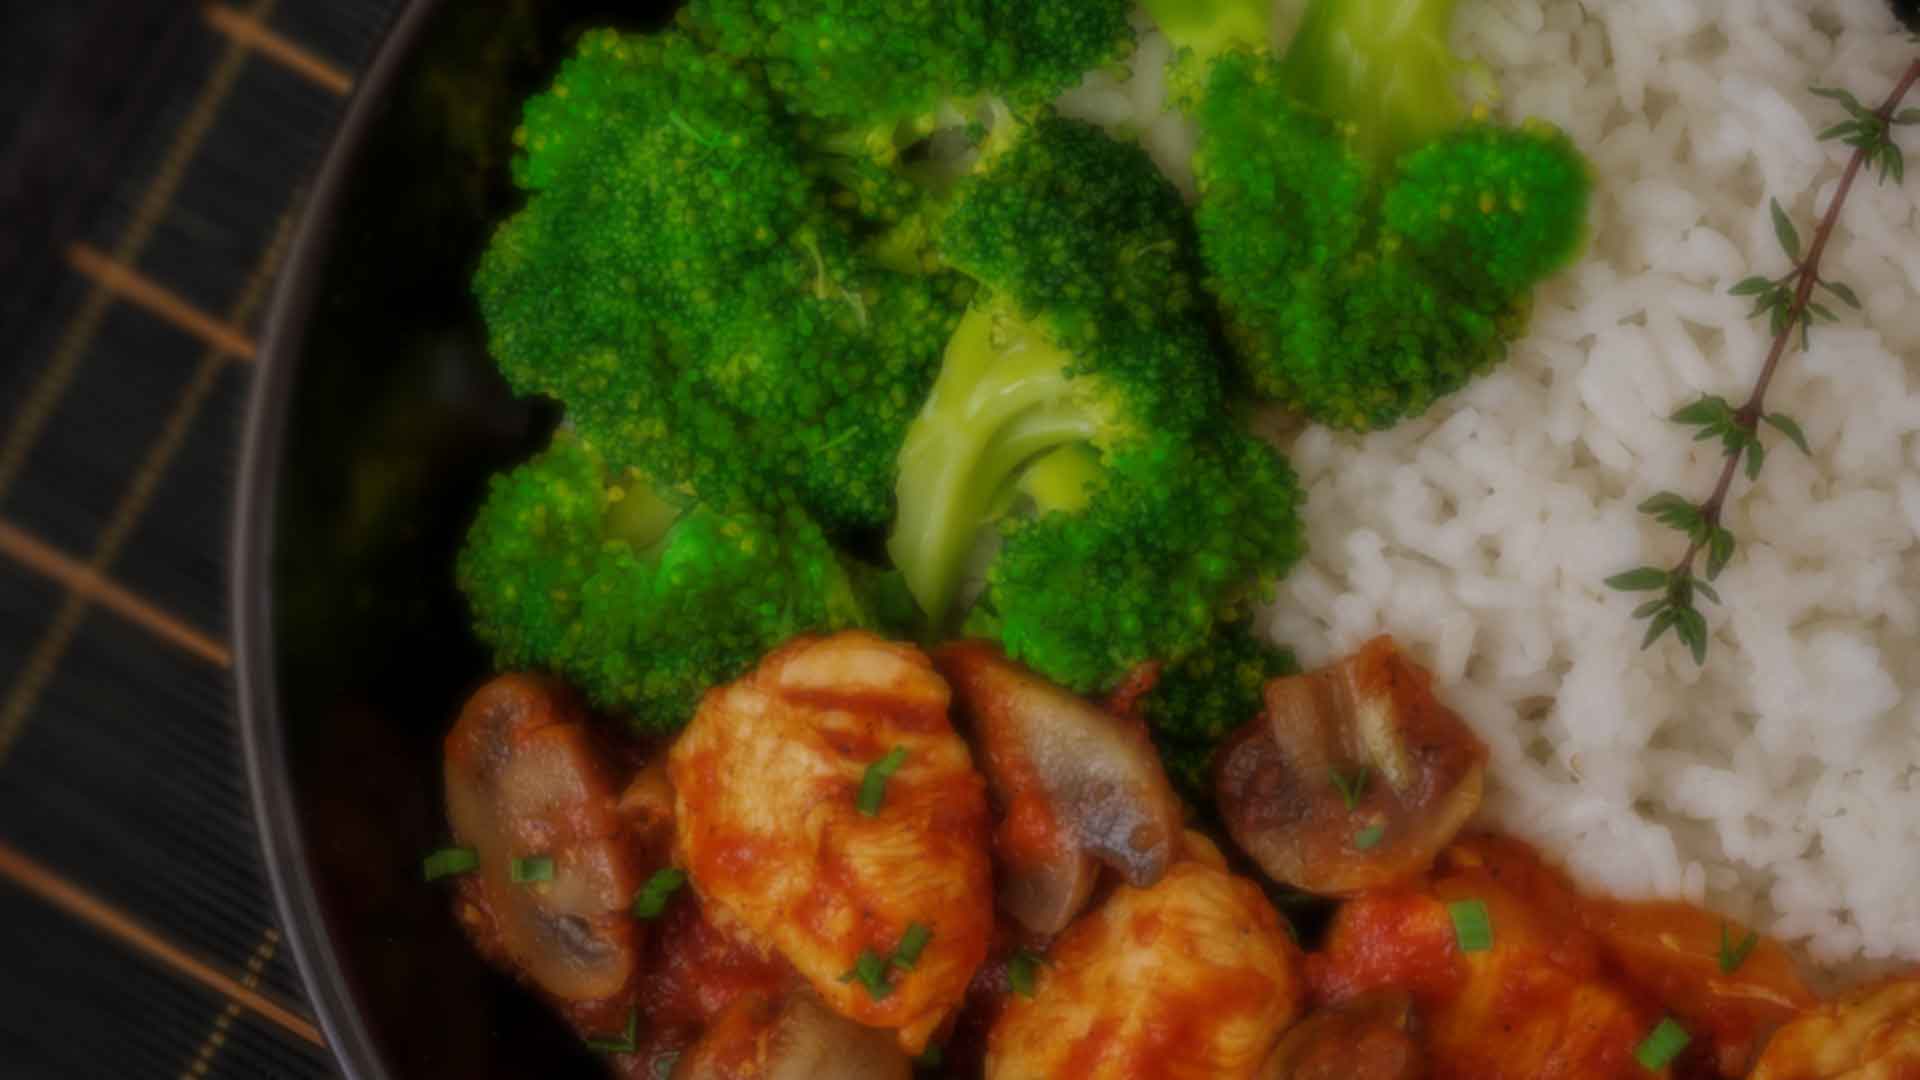 Chicken and mushrooms in tomato sauce with broccoli over rice